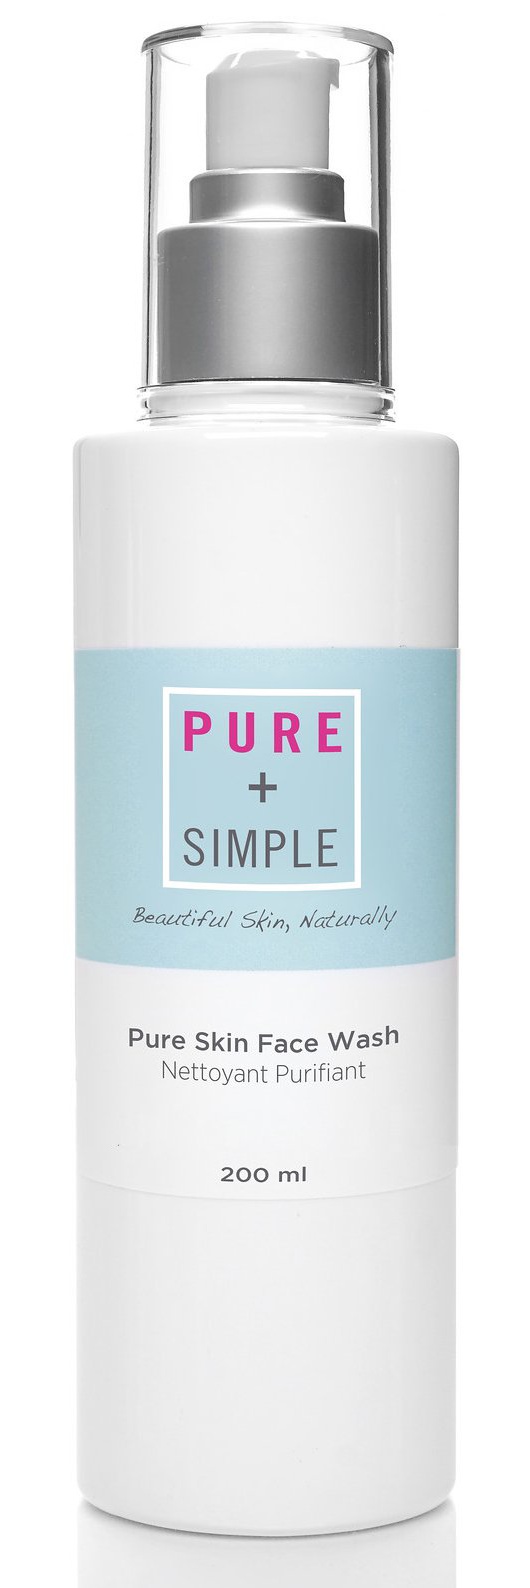 Pure + Simple Pure Skin Face Wash